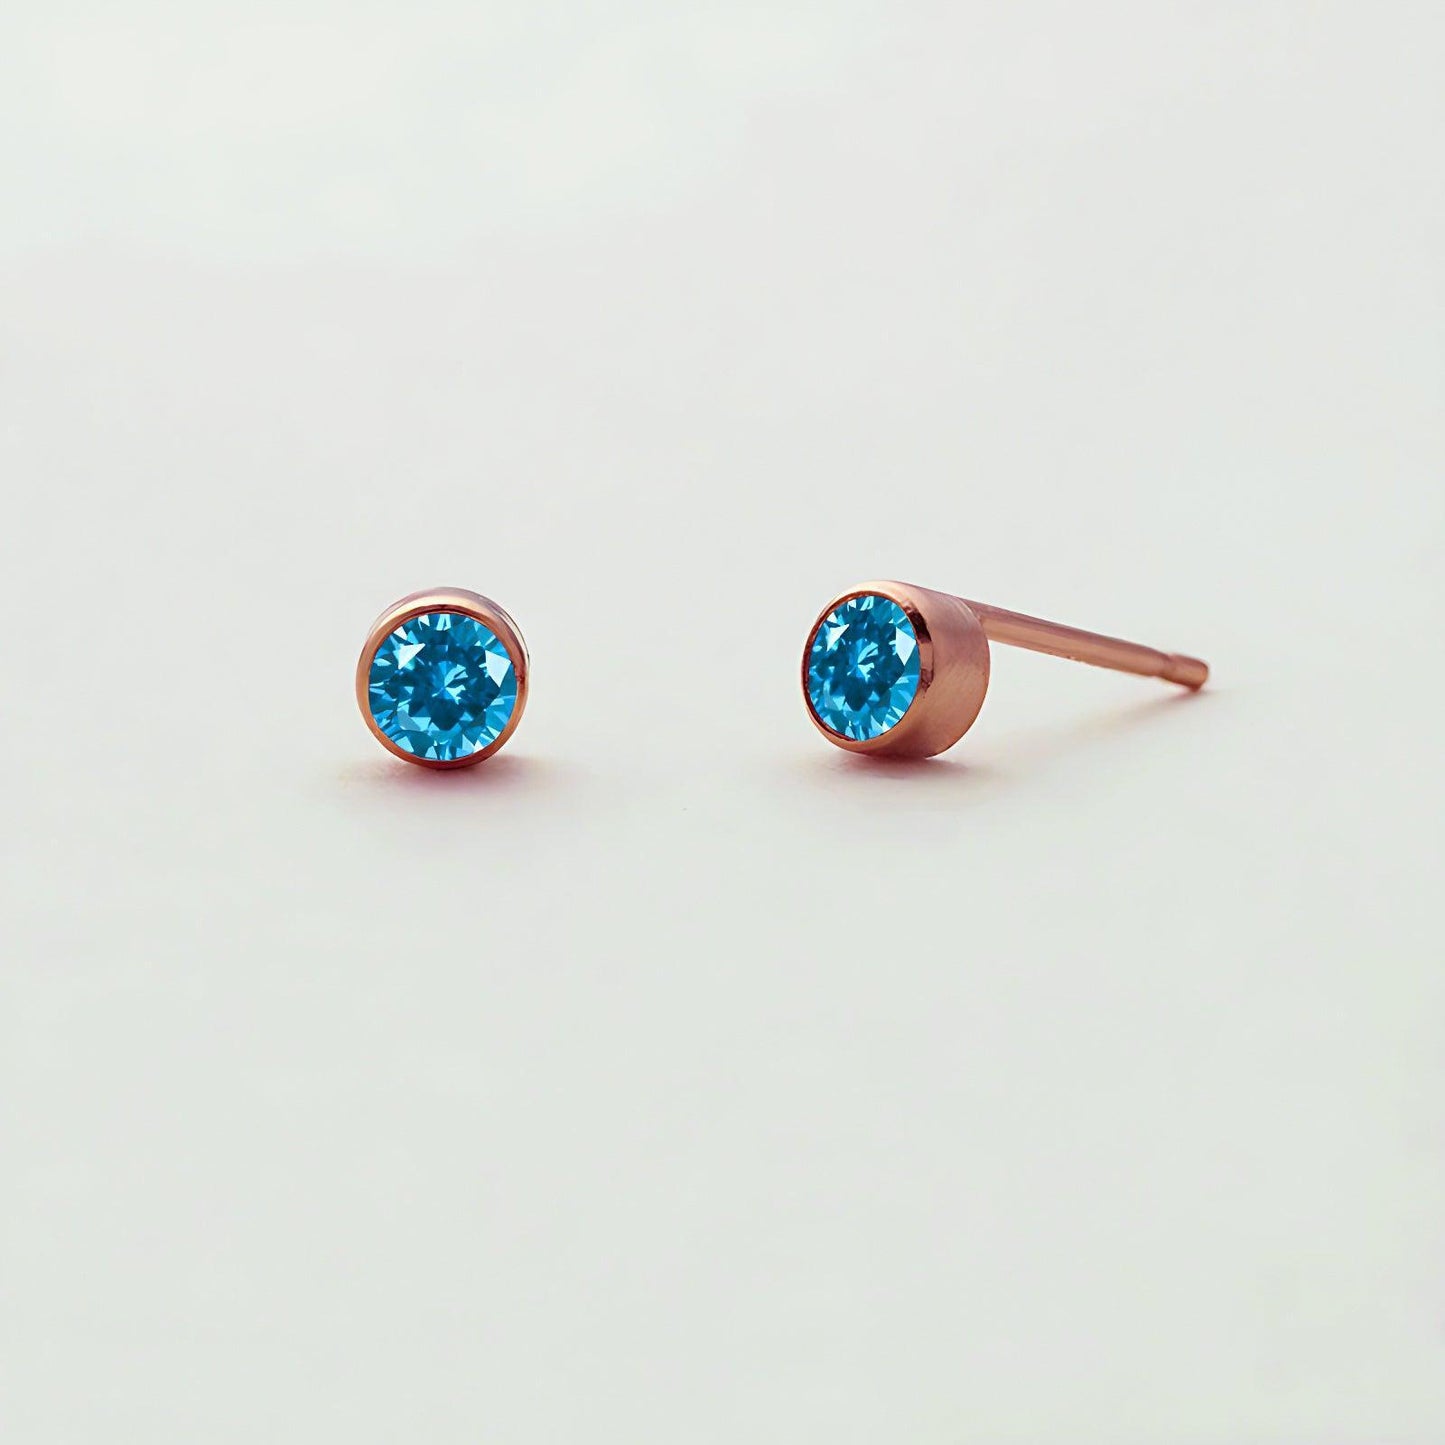 December Birthstone Cute Earrings for Christmas 2023 | December Birthstone Cute Earrings - undefined | birthstone earring, birthstone jewelry, Creative Cute Earrings, December Birthstone Earrings, December birthstone is Turquoise | From Hunny Life | hunnylife.com